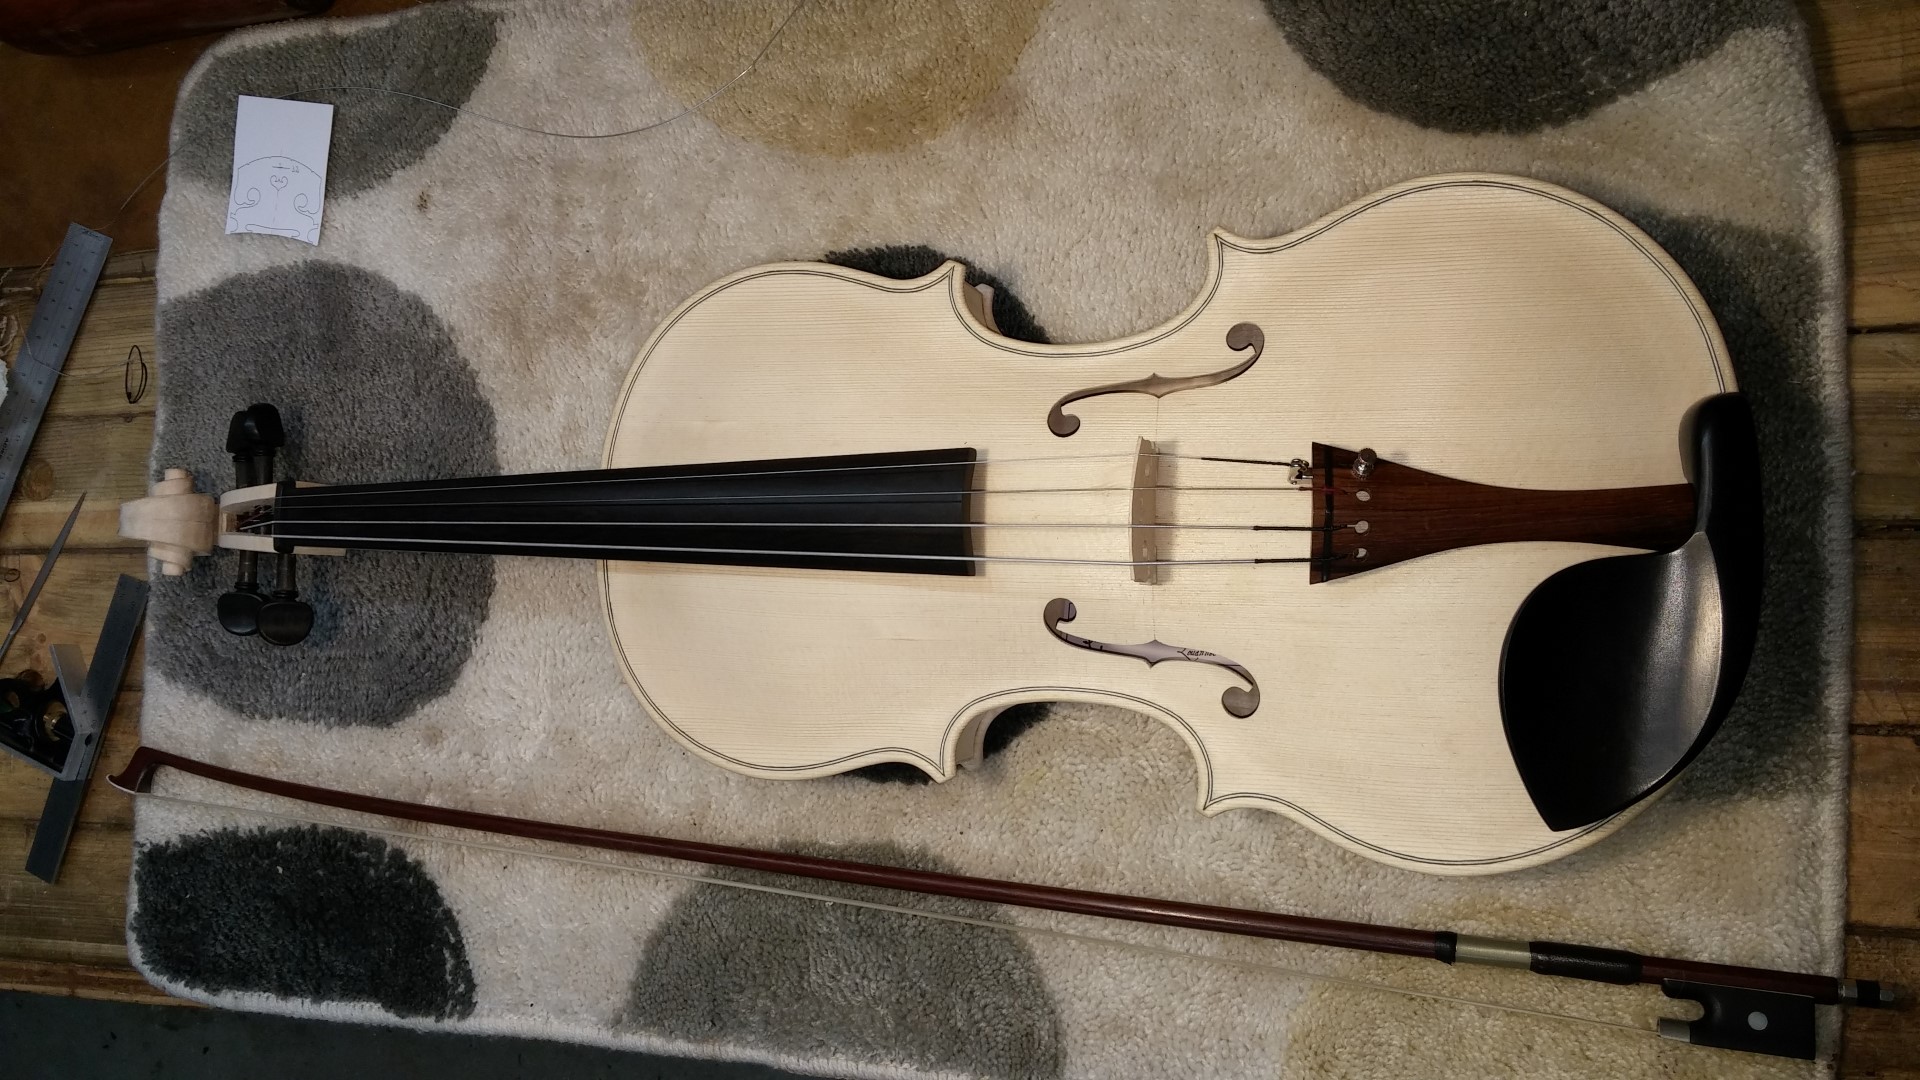 My Viola finished in the white